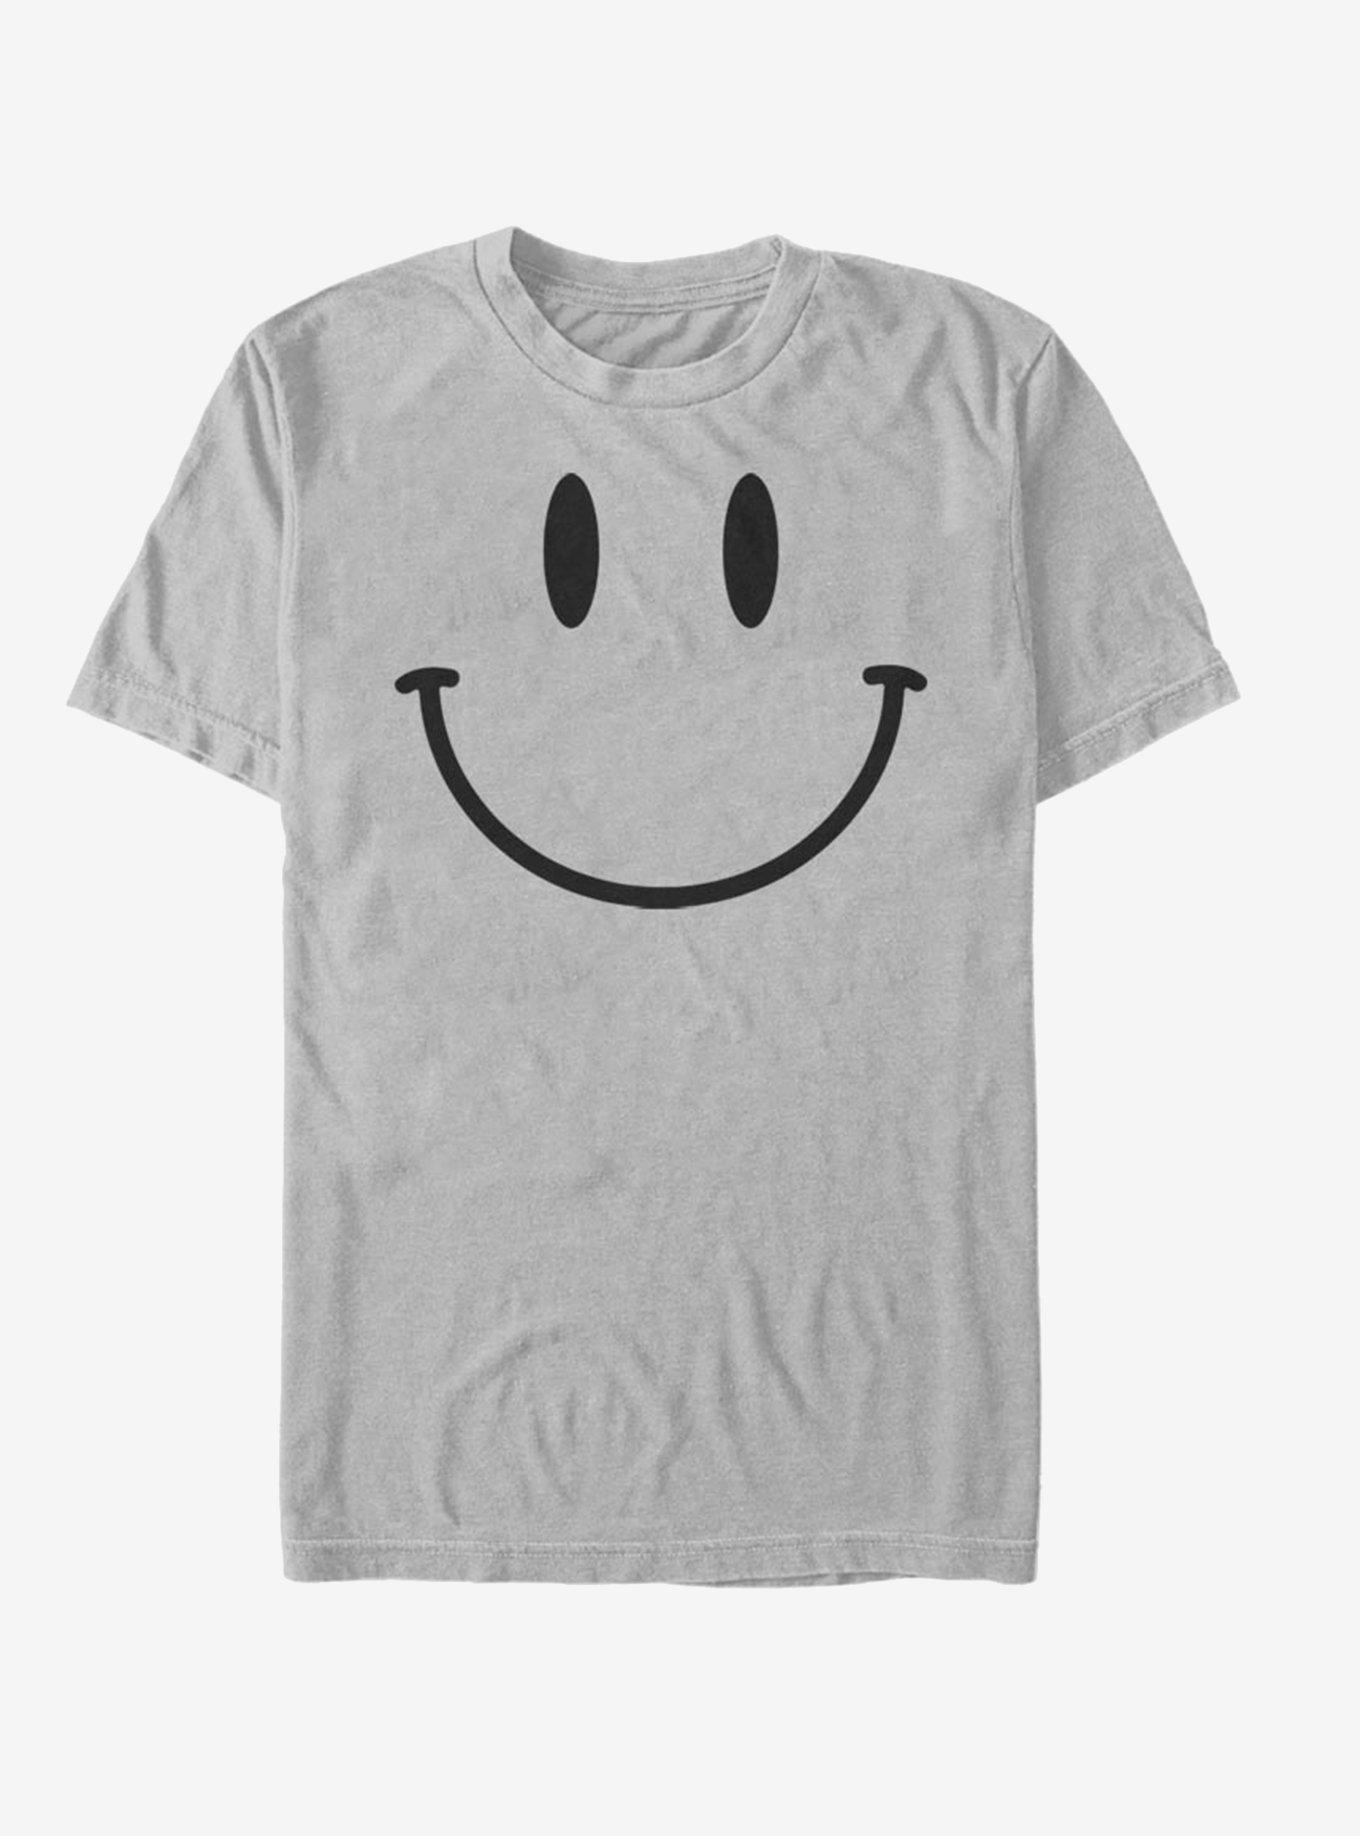 Smiley Face T-Shirt - SILVER | Hot Topic